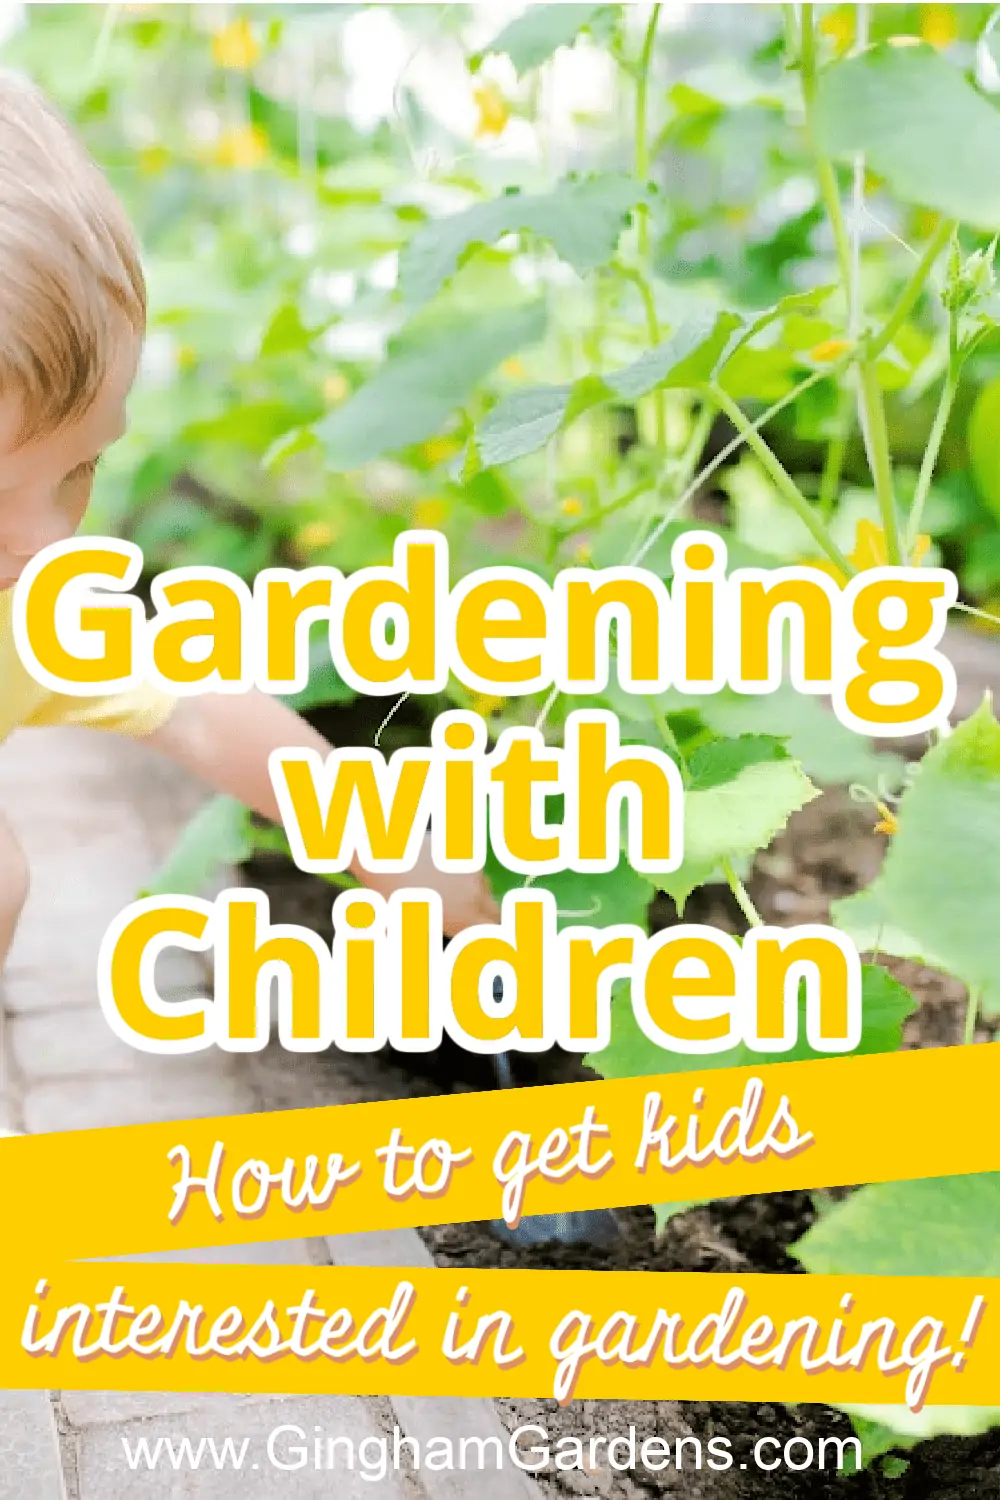 Image of a child in a garden with text overlay - Gardening with Children - How to get kids interested in gardening